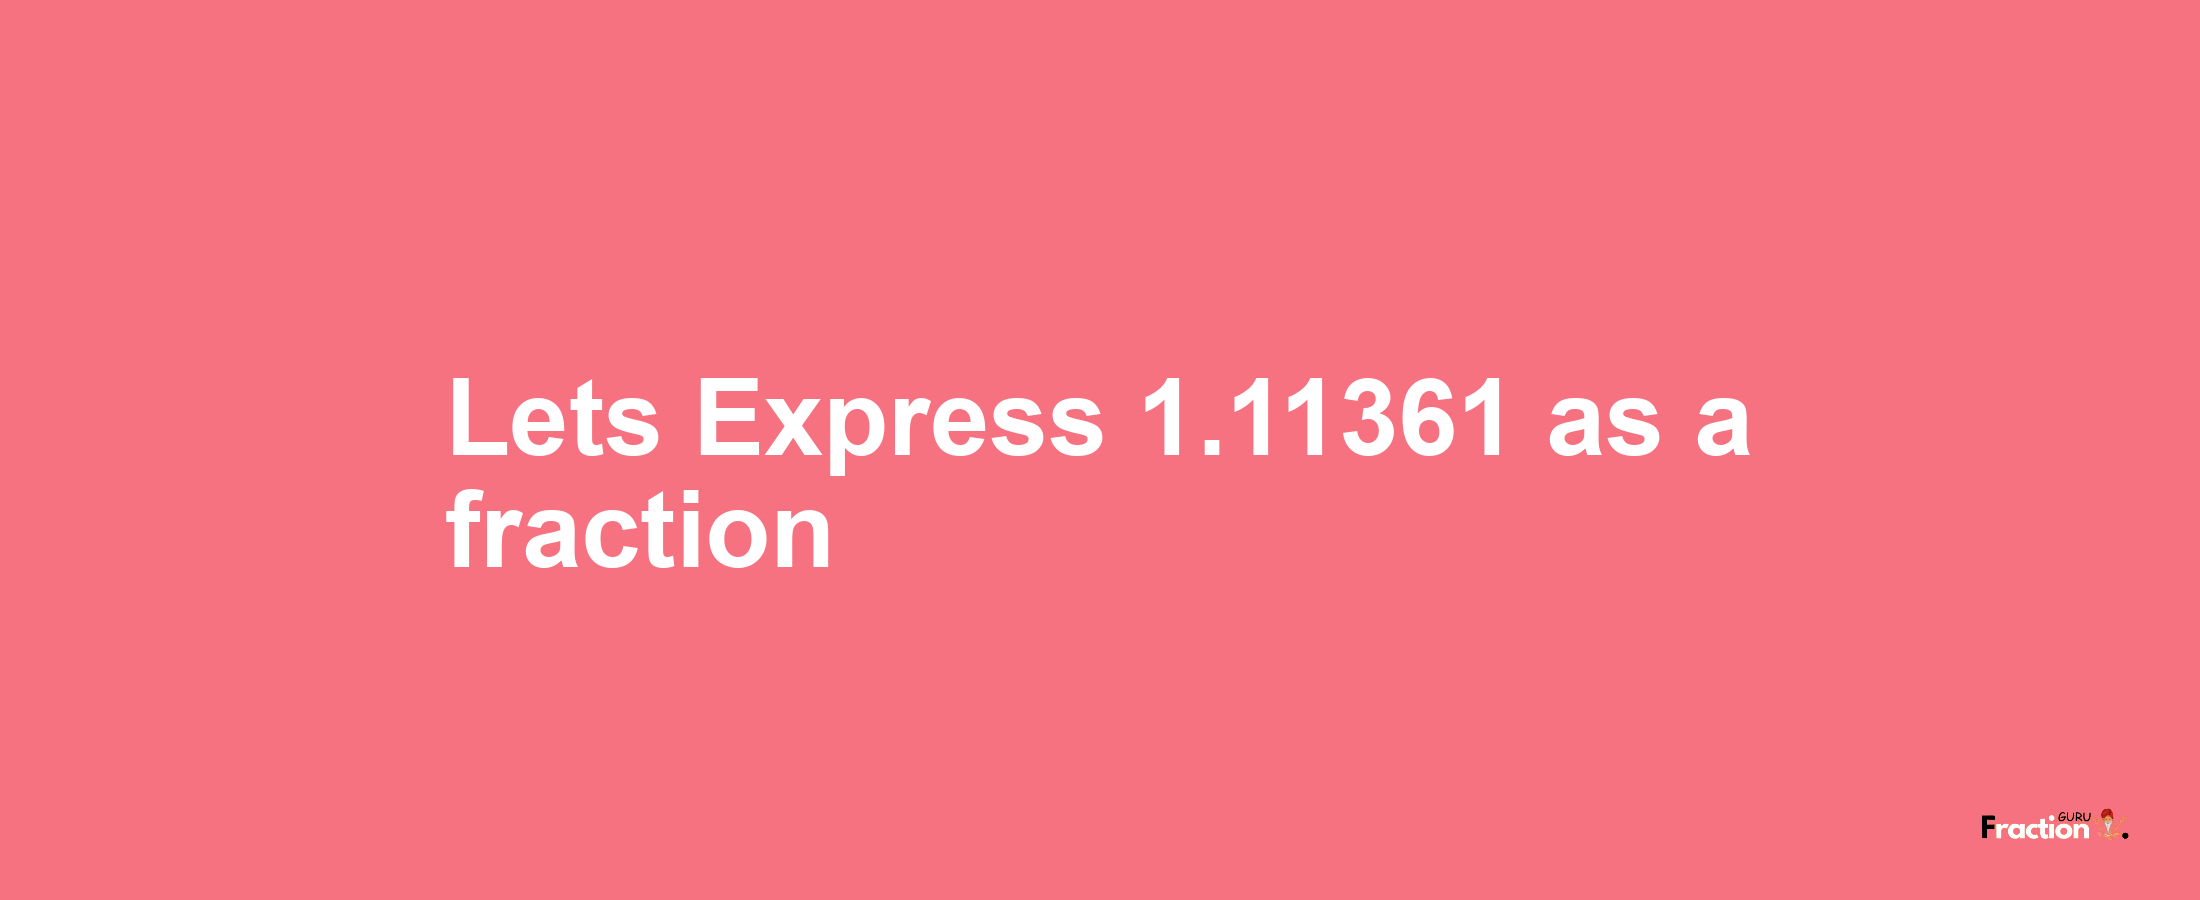 Lets Express 1.11361 as afraction